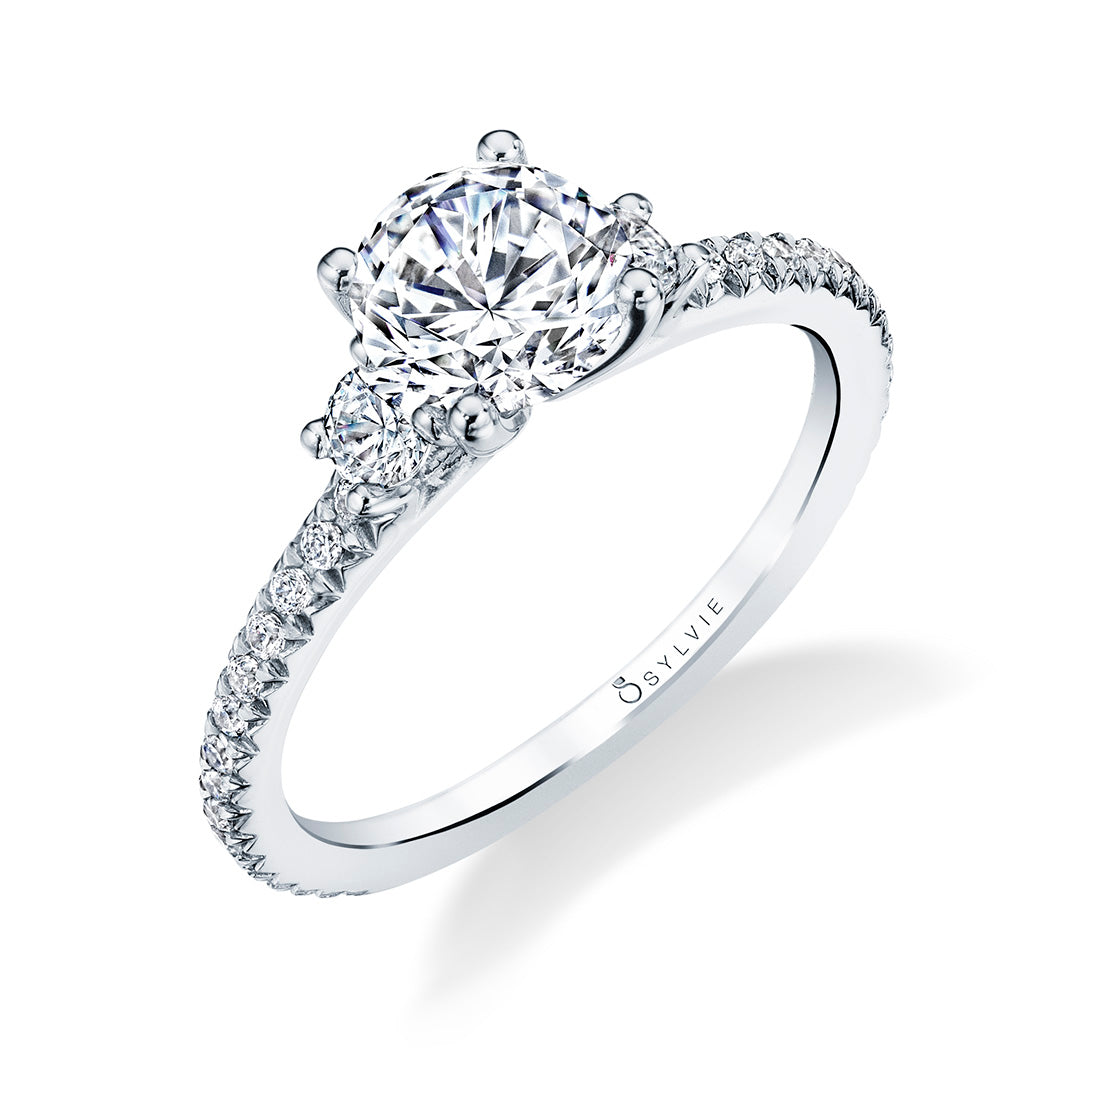 Sylvie Collection .35ctw Diamond Semi-Mount in 14k White Gold. This delicate three stone engagement ring features a beautiful 1 carat round center in a prong setting. The shank includes shimmering, cascading round-cut diamonds on both sides of the band, bringing the band's total weight to 0.39 carats.  A semi-mount engagement ring is a diamond mounting that lacks the center stone. Center stones are purchased and priced separately.